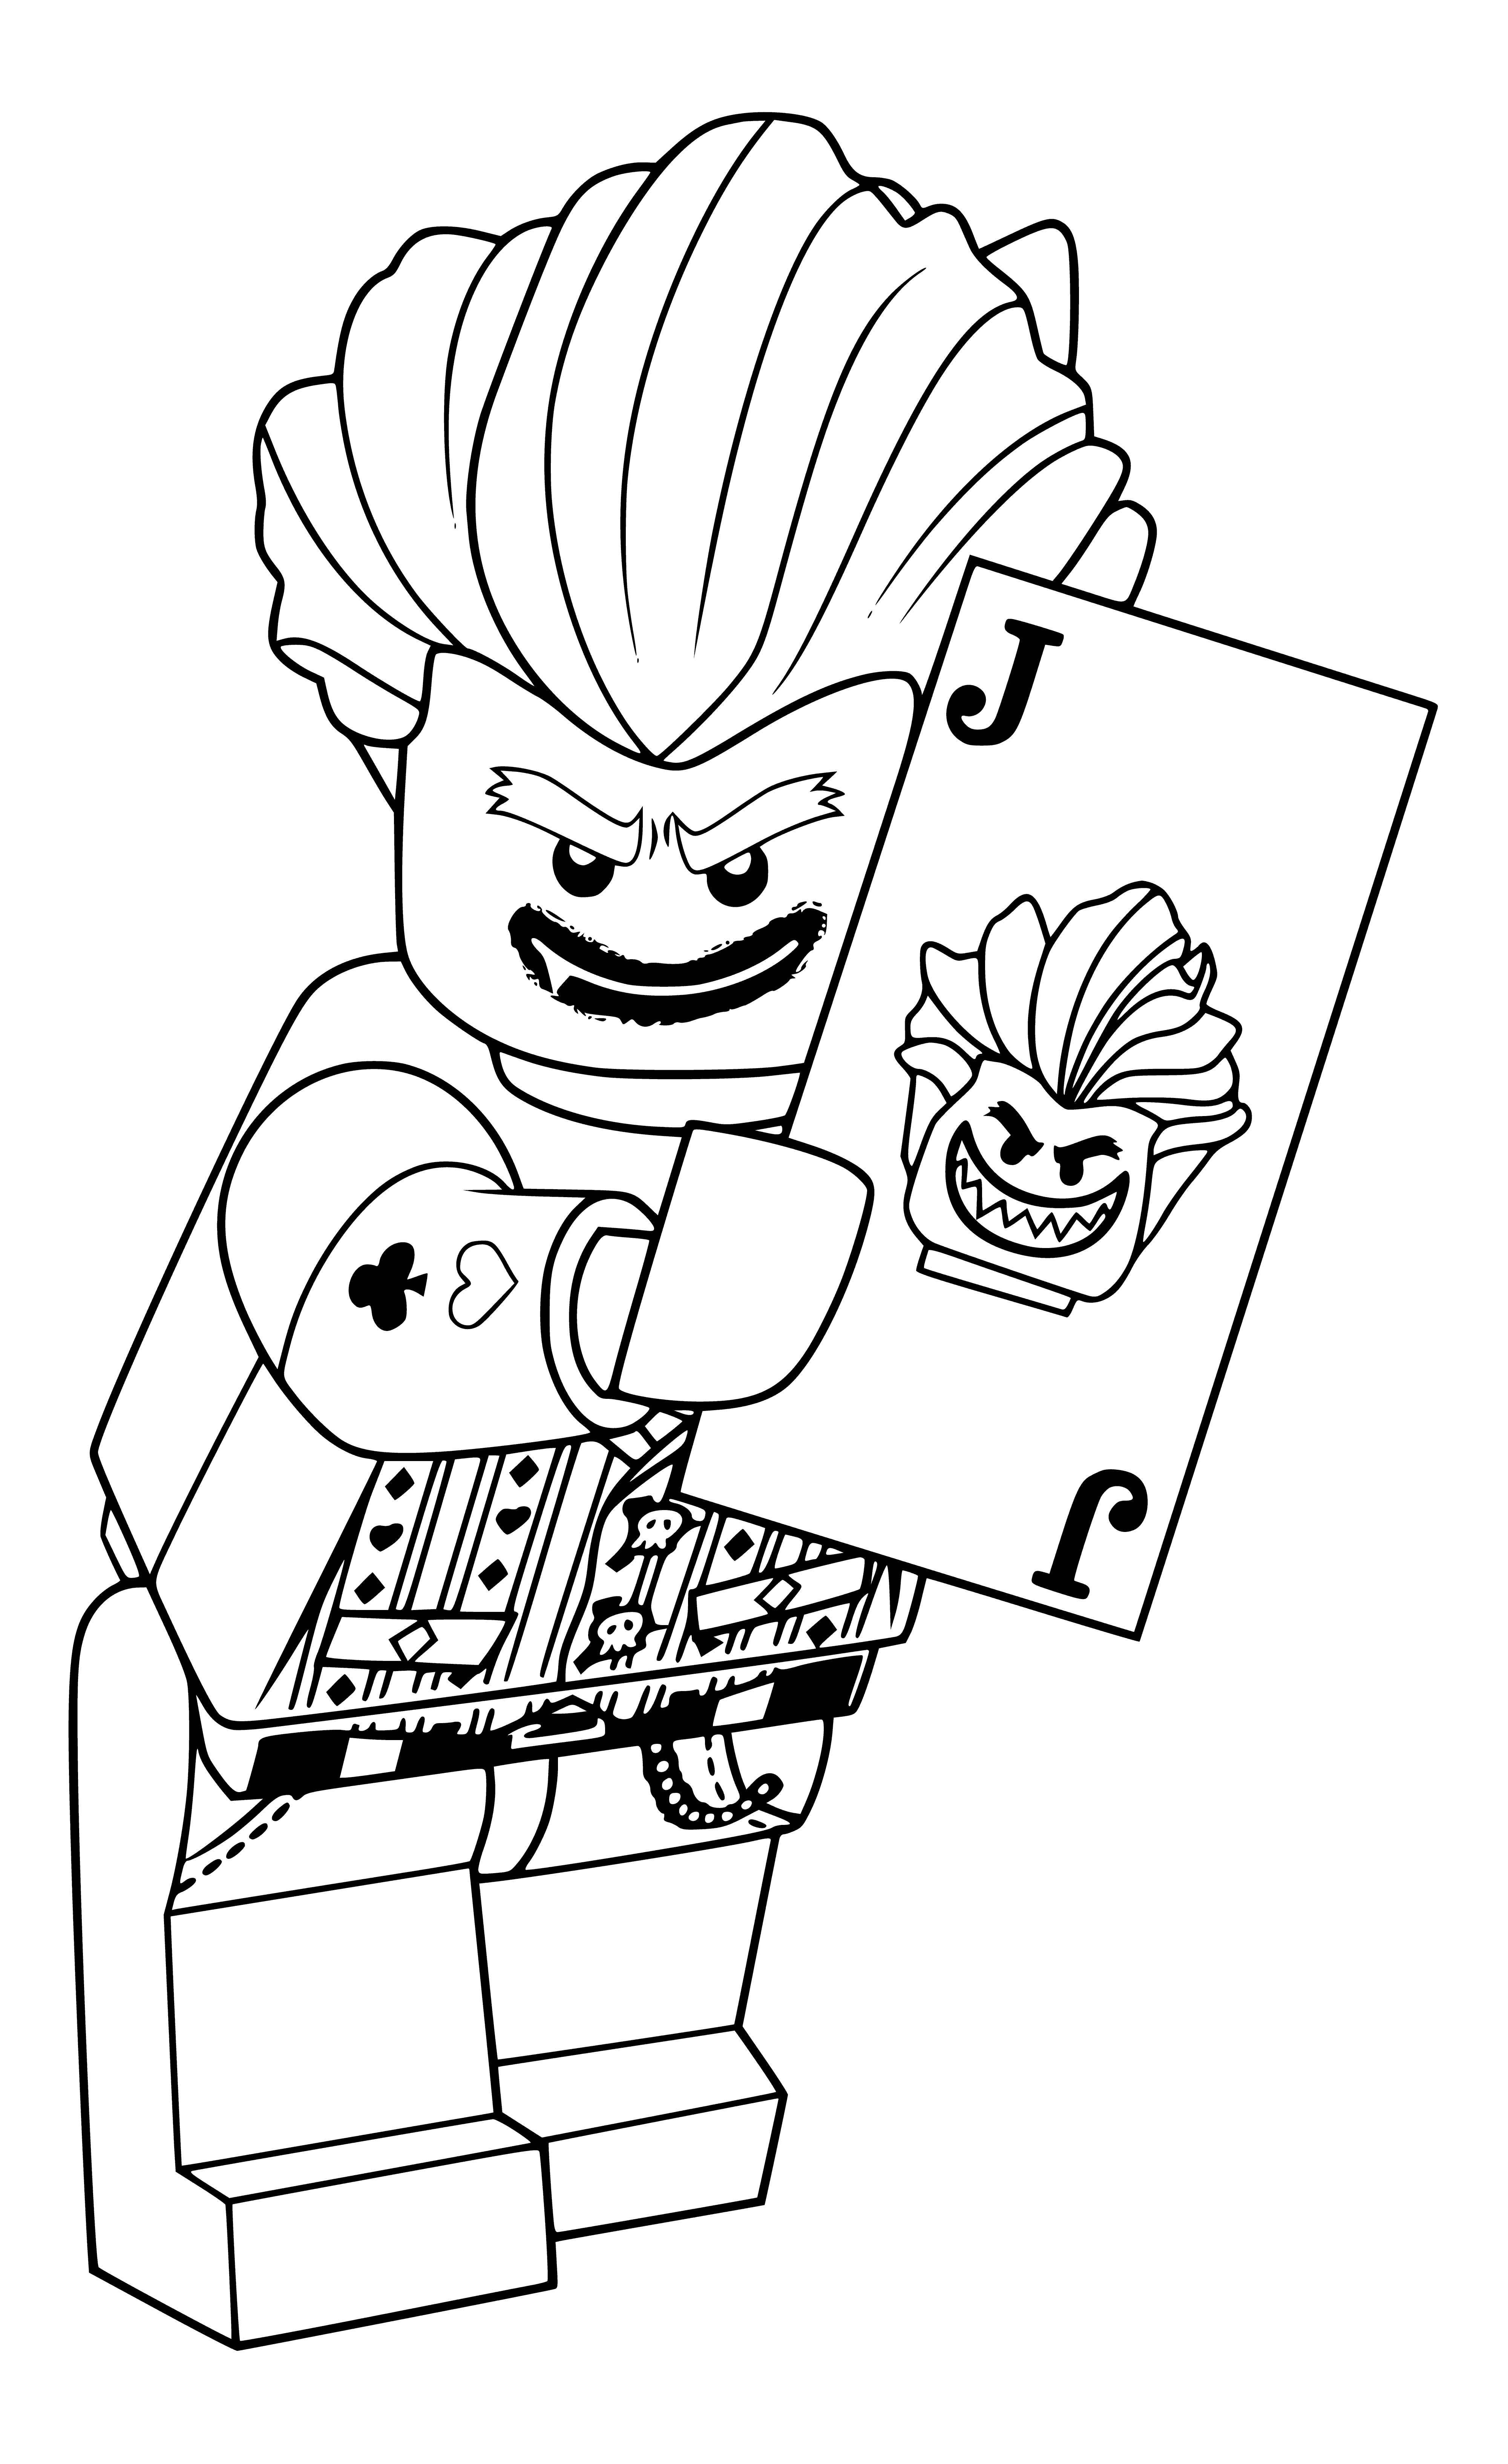 coloring page: The Joker stands watching a blue and white Batarang soar through the air above the city. His purple suit, green shirt & white makeup highlight his mischievous grin.